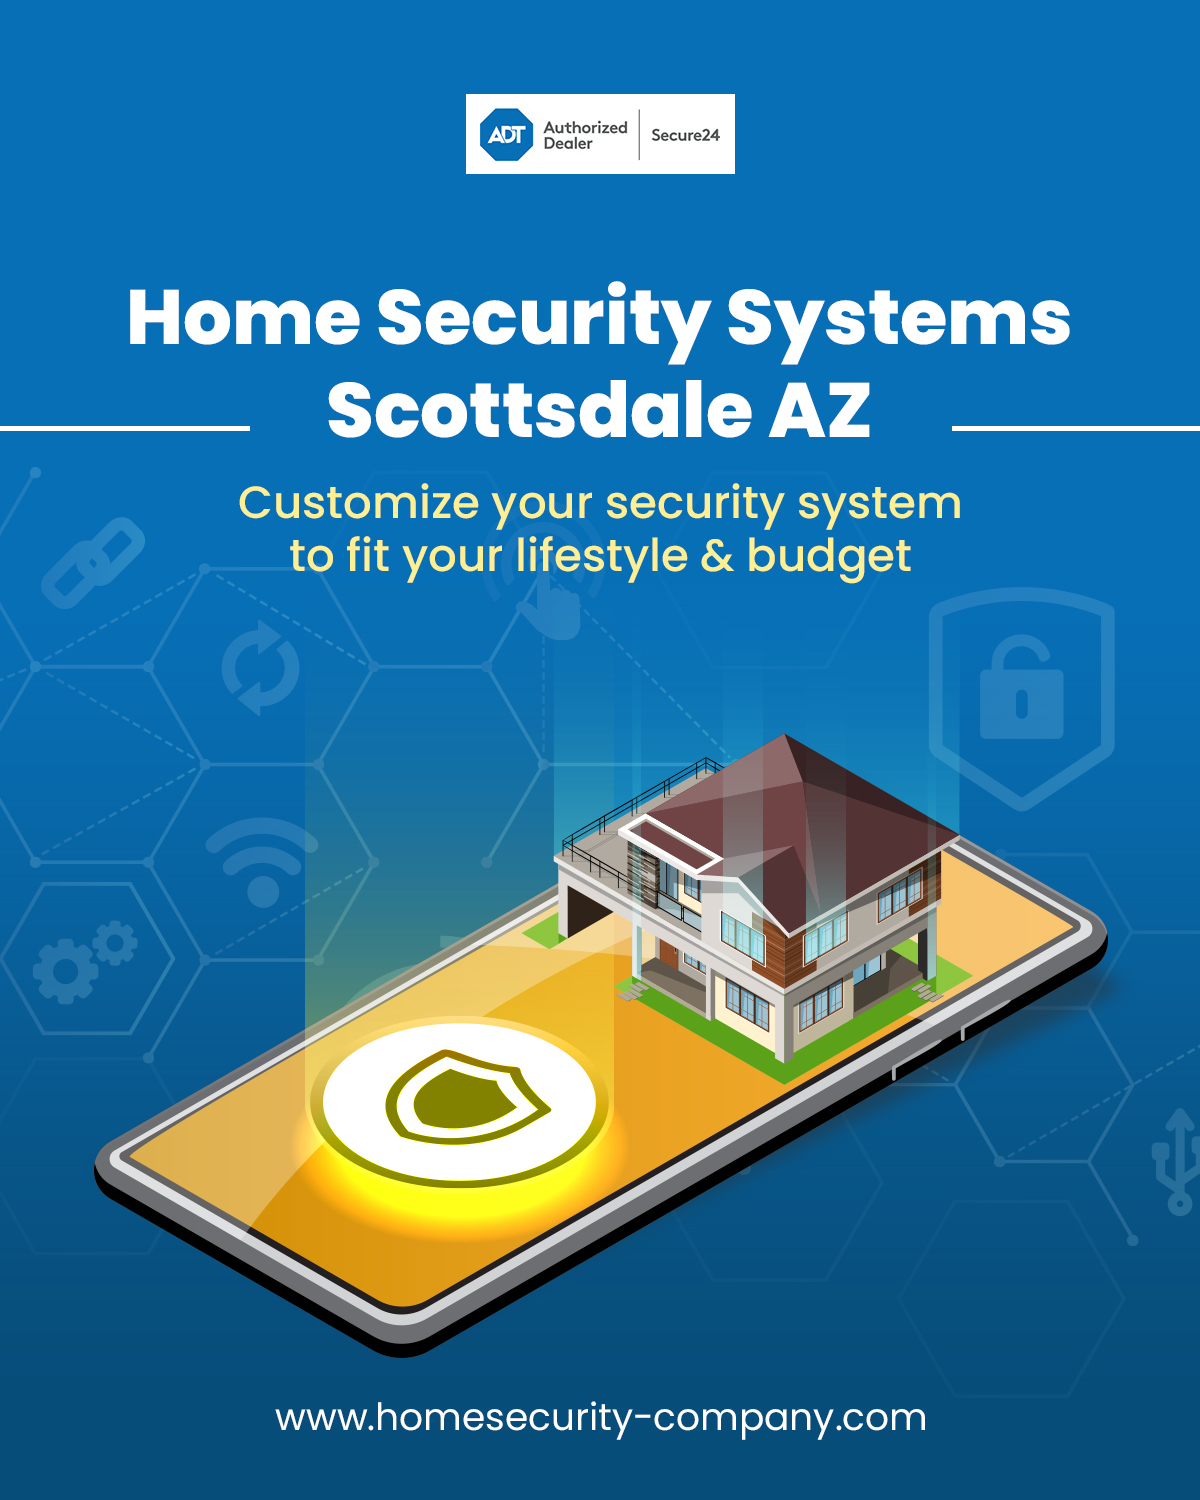 Advanced Smart Home Security Systems In Scottsdale AZ | Home Sec Blank Meme Template